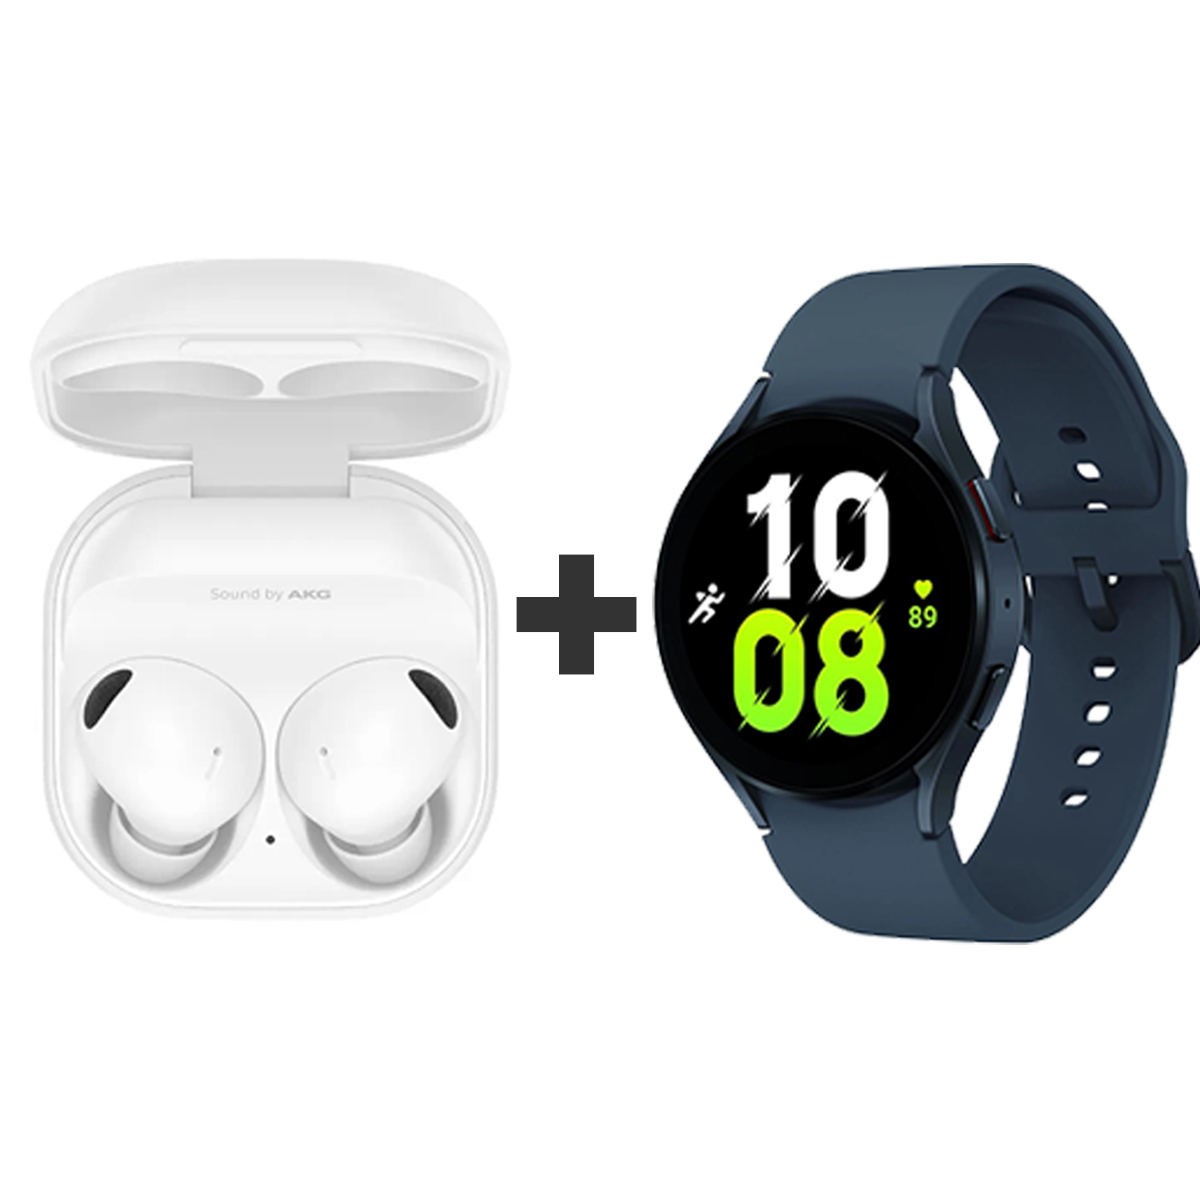 SAMSUNG WEARABLES COMBO